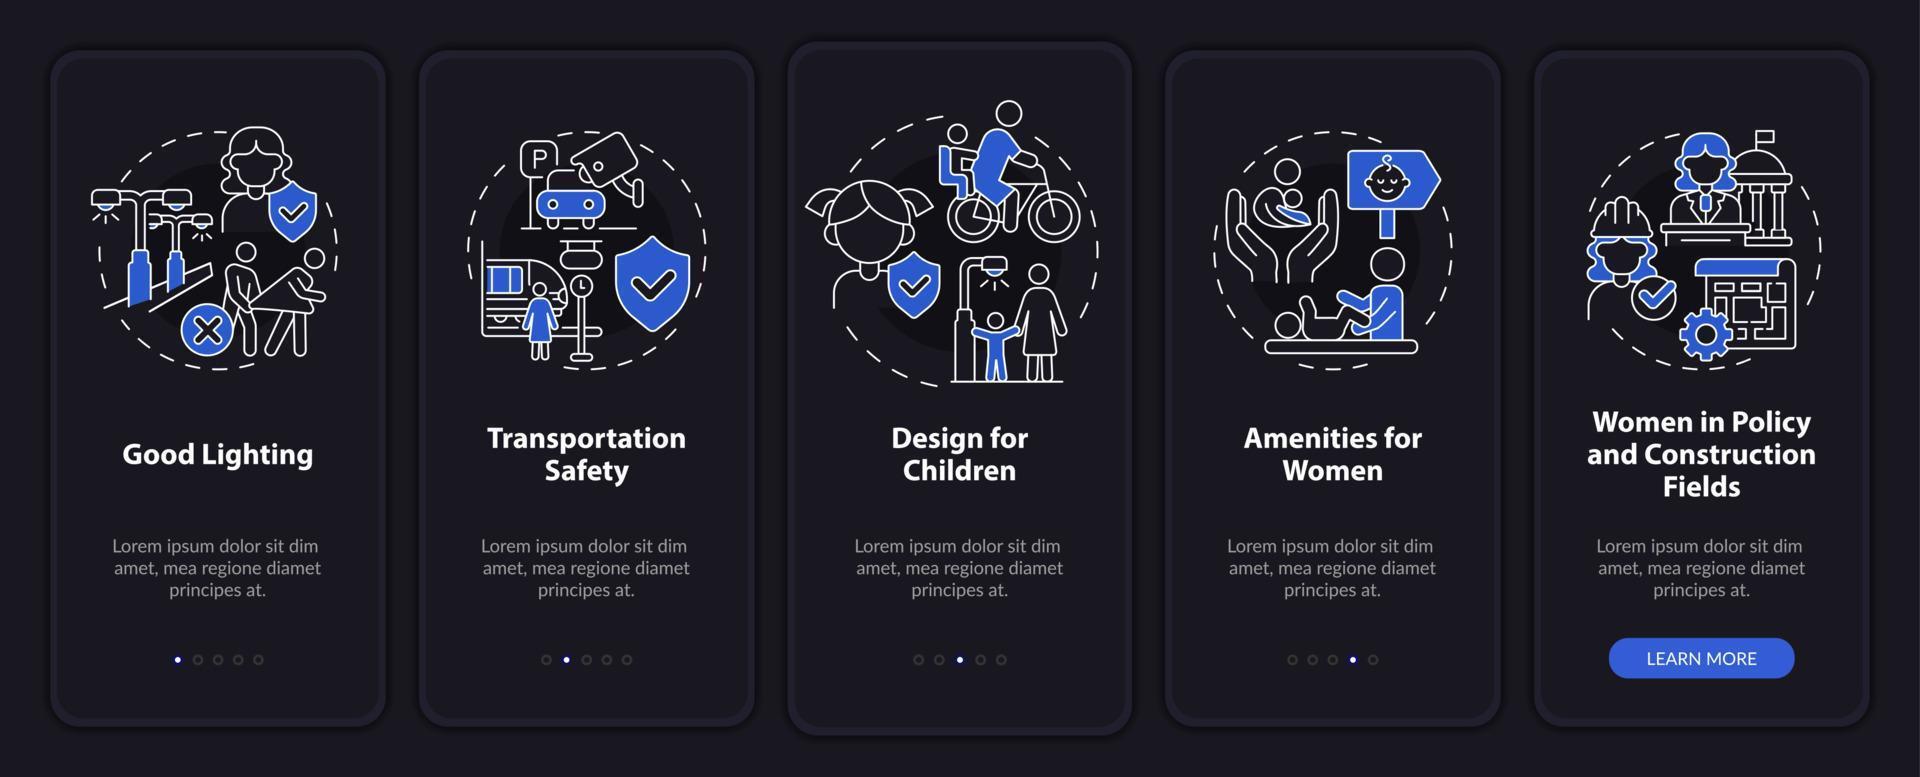 City design for women and kids night mode onboarding mobile app screen. Walkthrough 5 steps graphic instructions pages with linear concepts. UI, UX, GUI template. vector